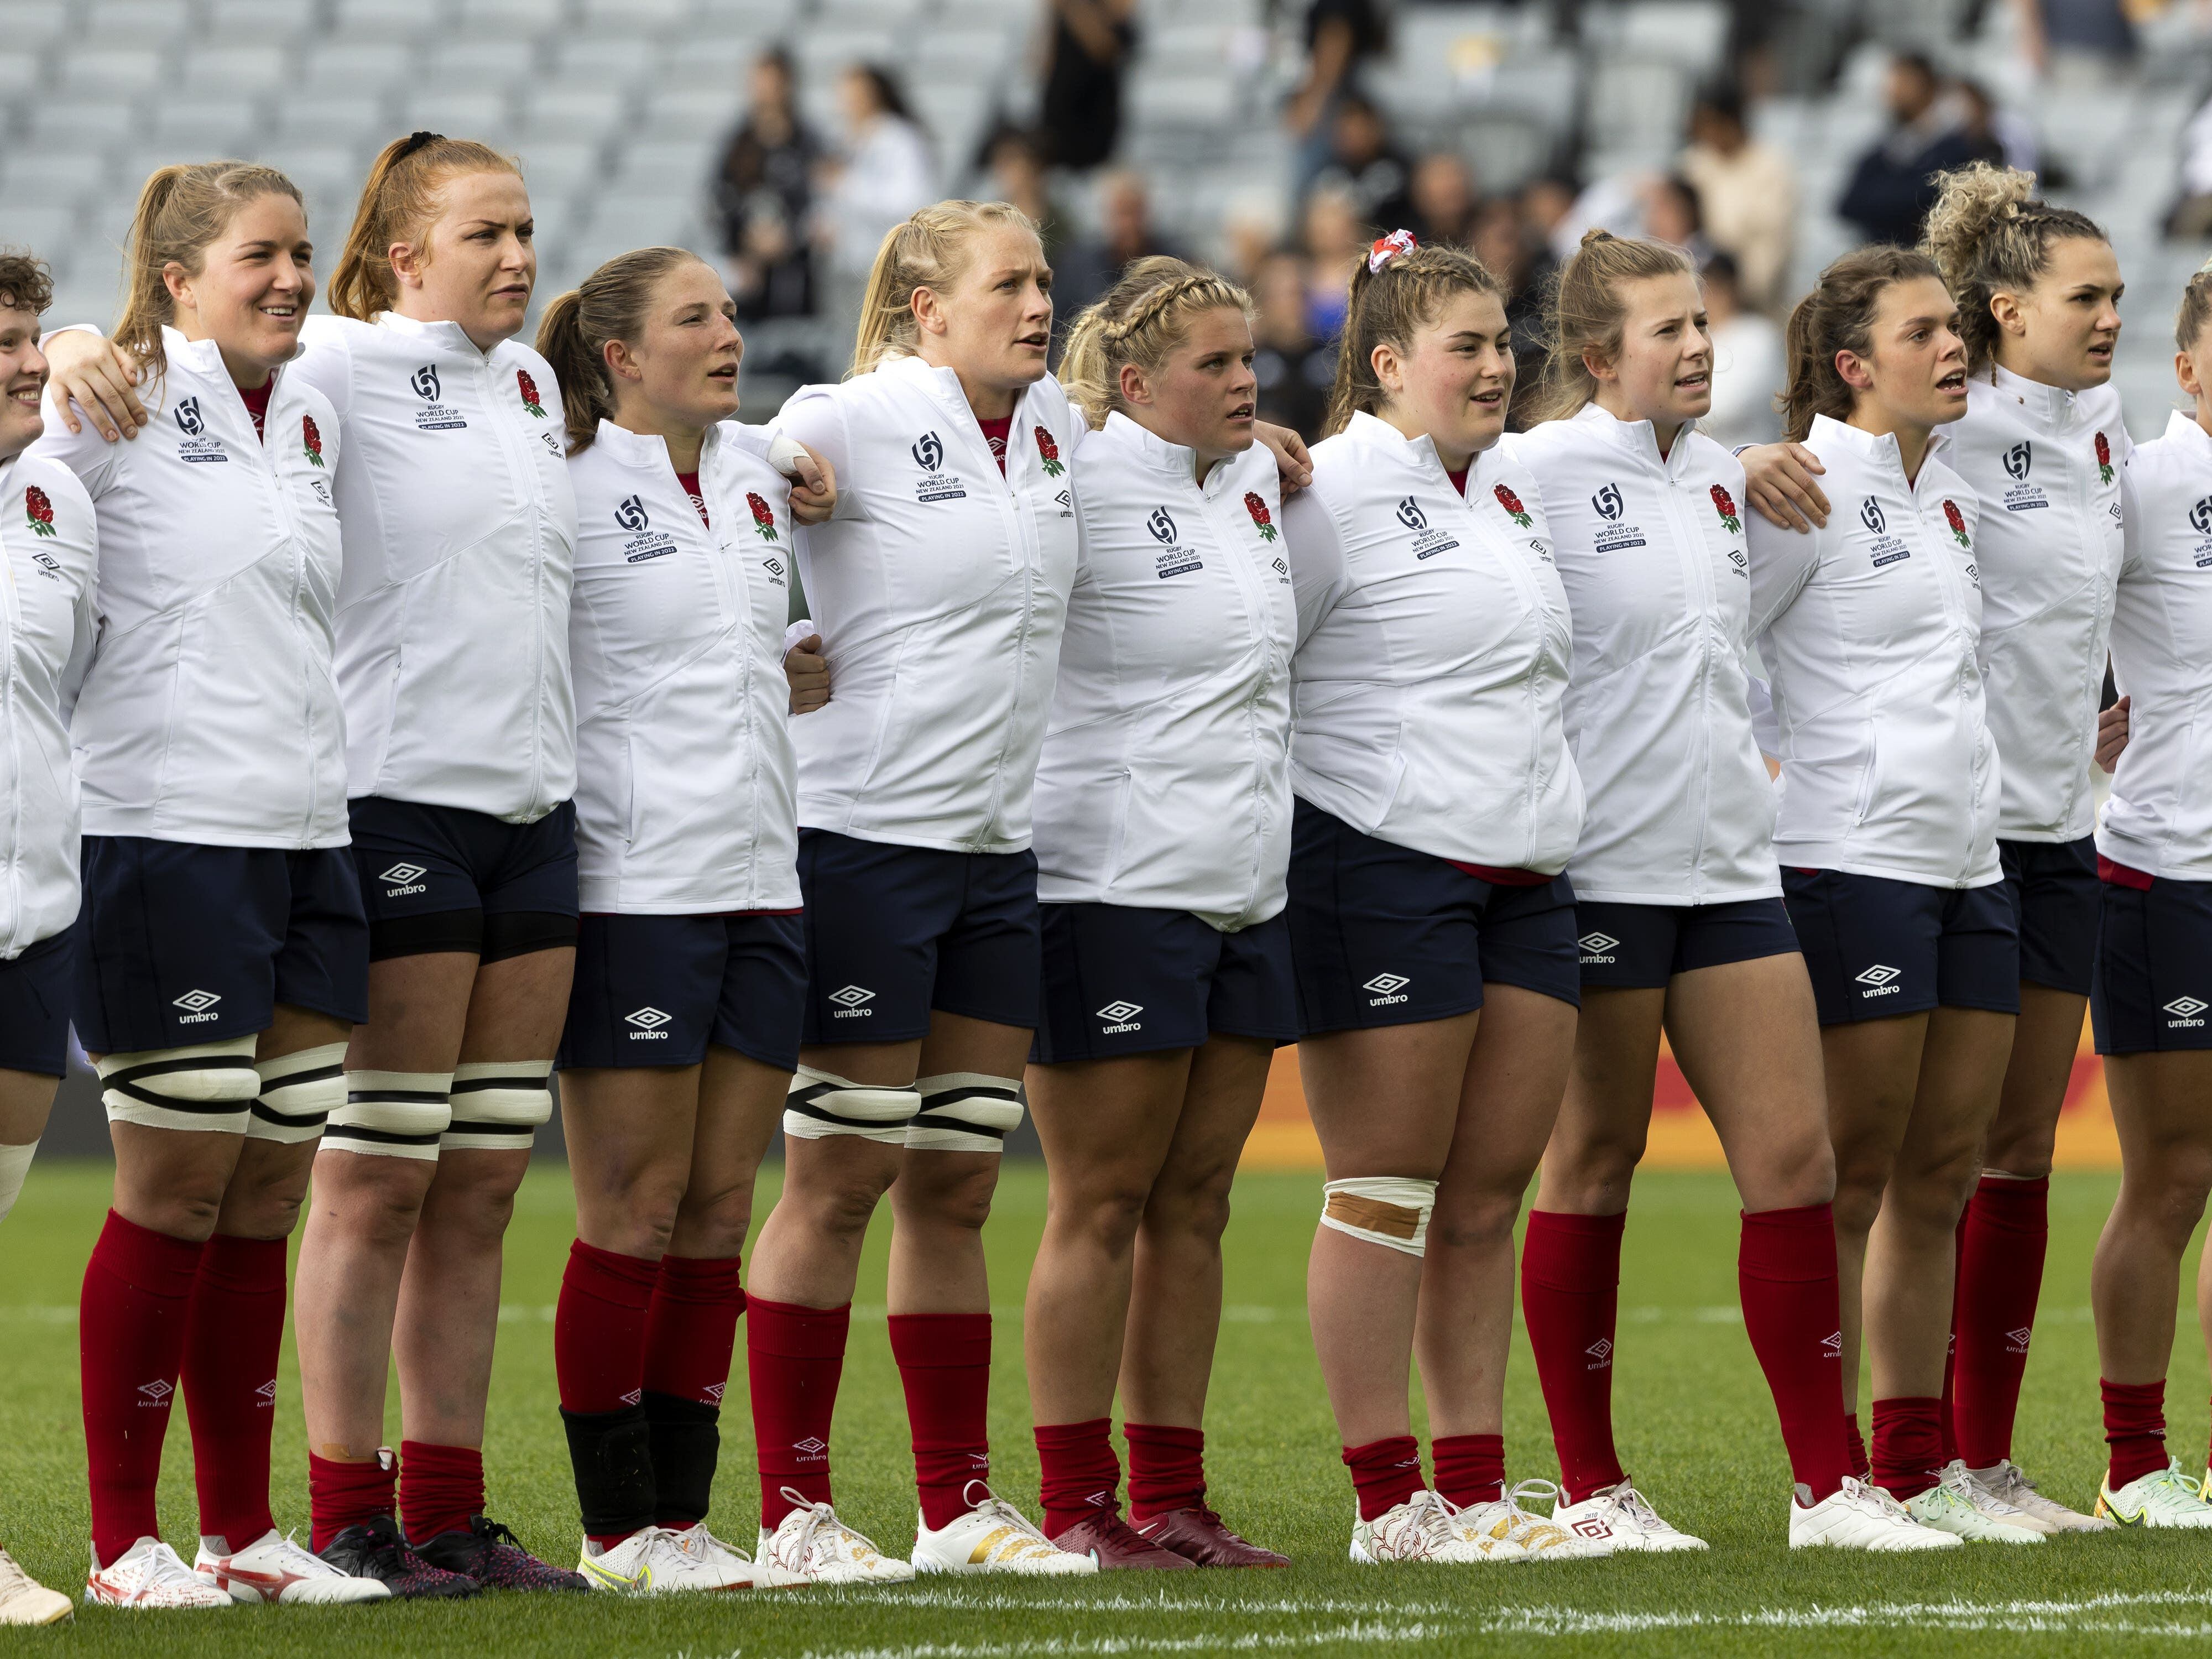 World Rugby: Rugby World Cup 2025 hosts England to play pivotal role in sport